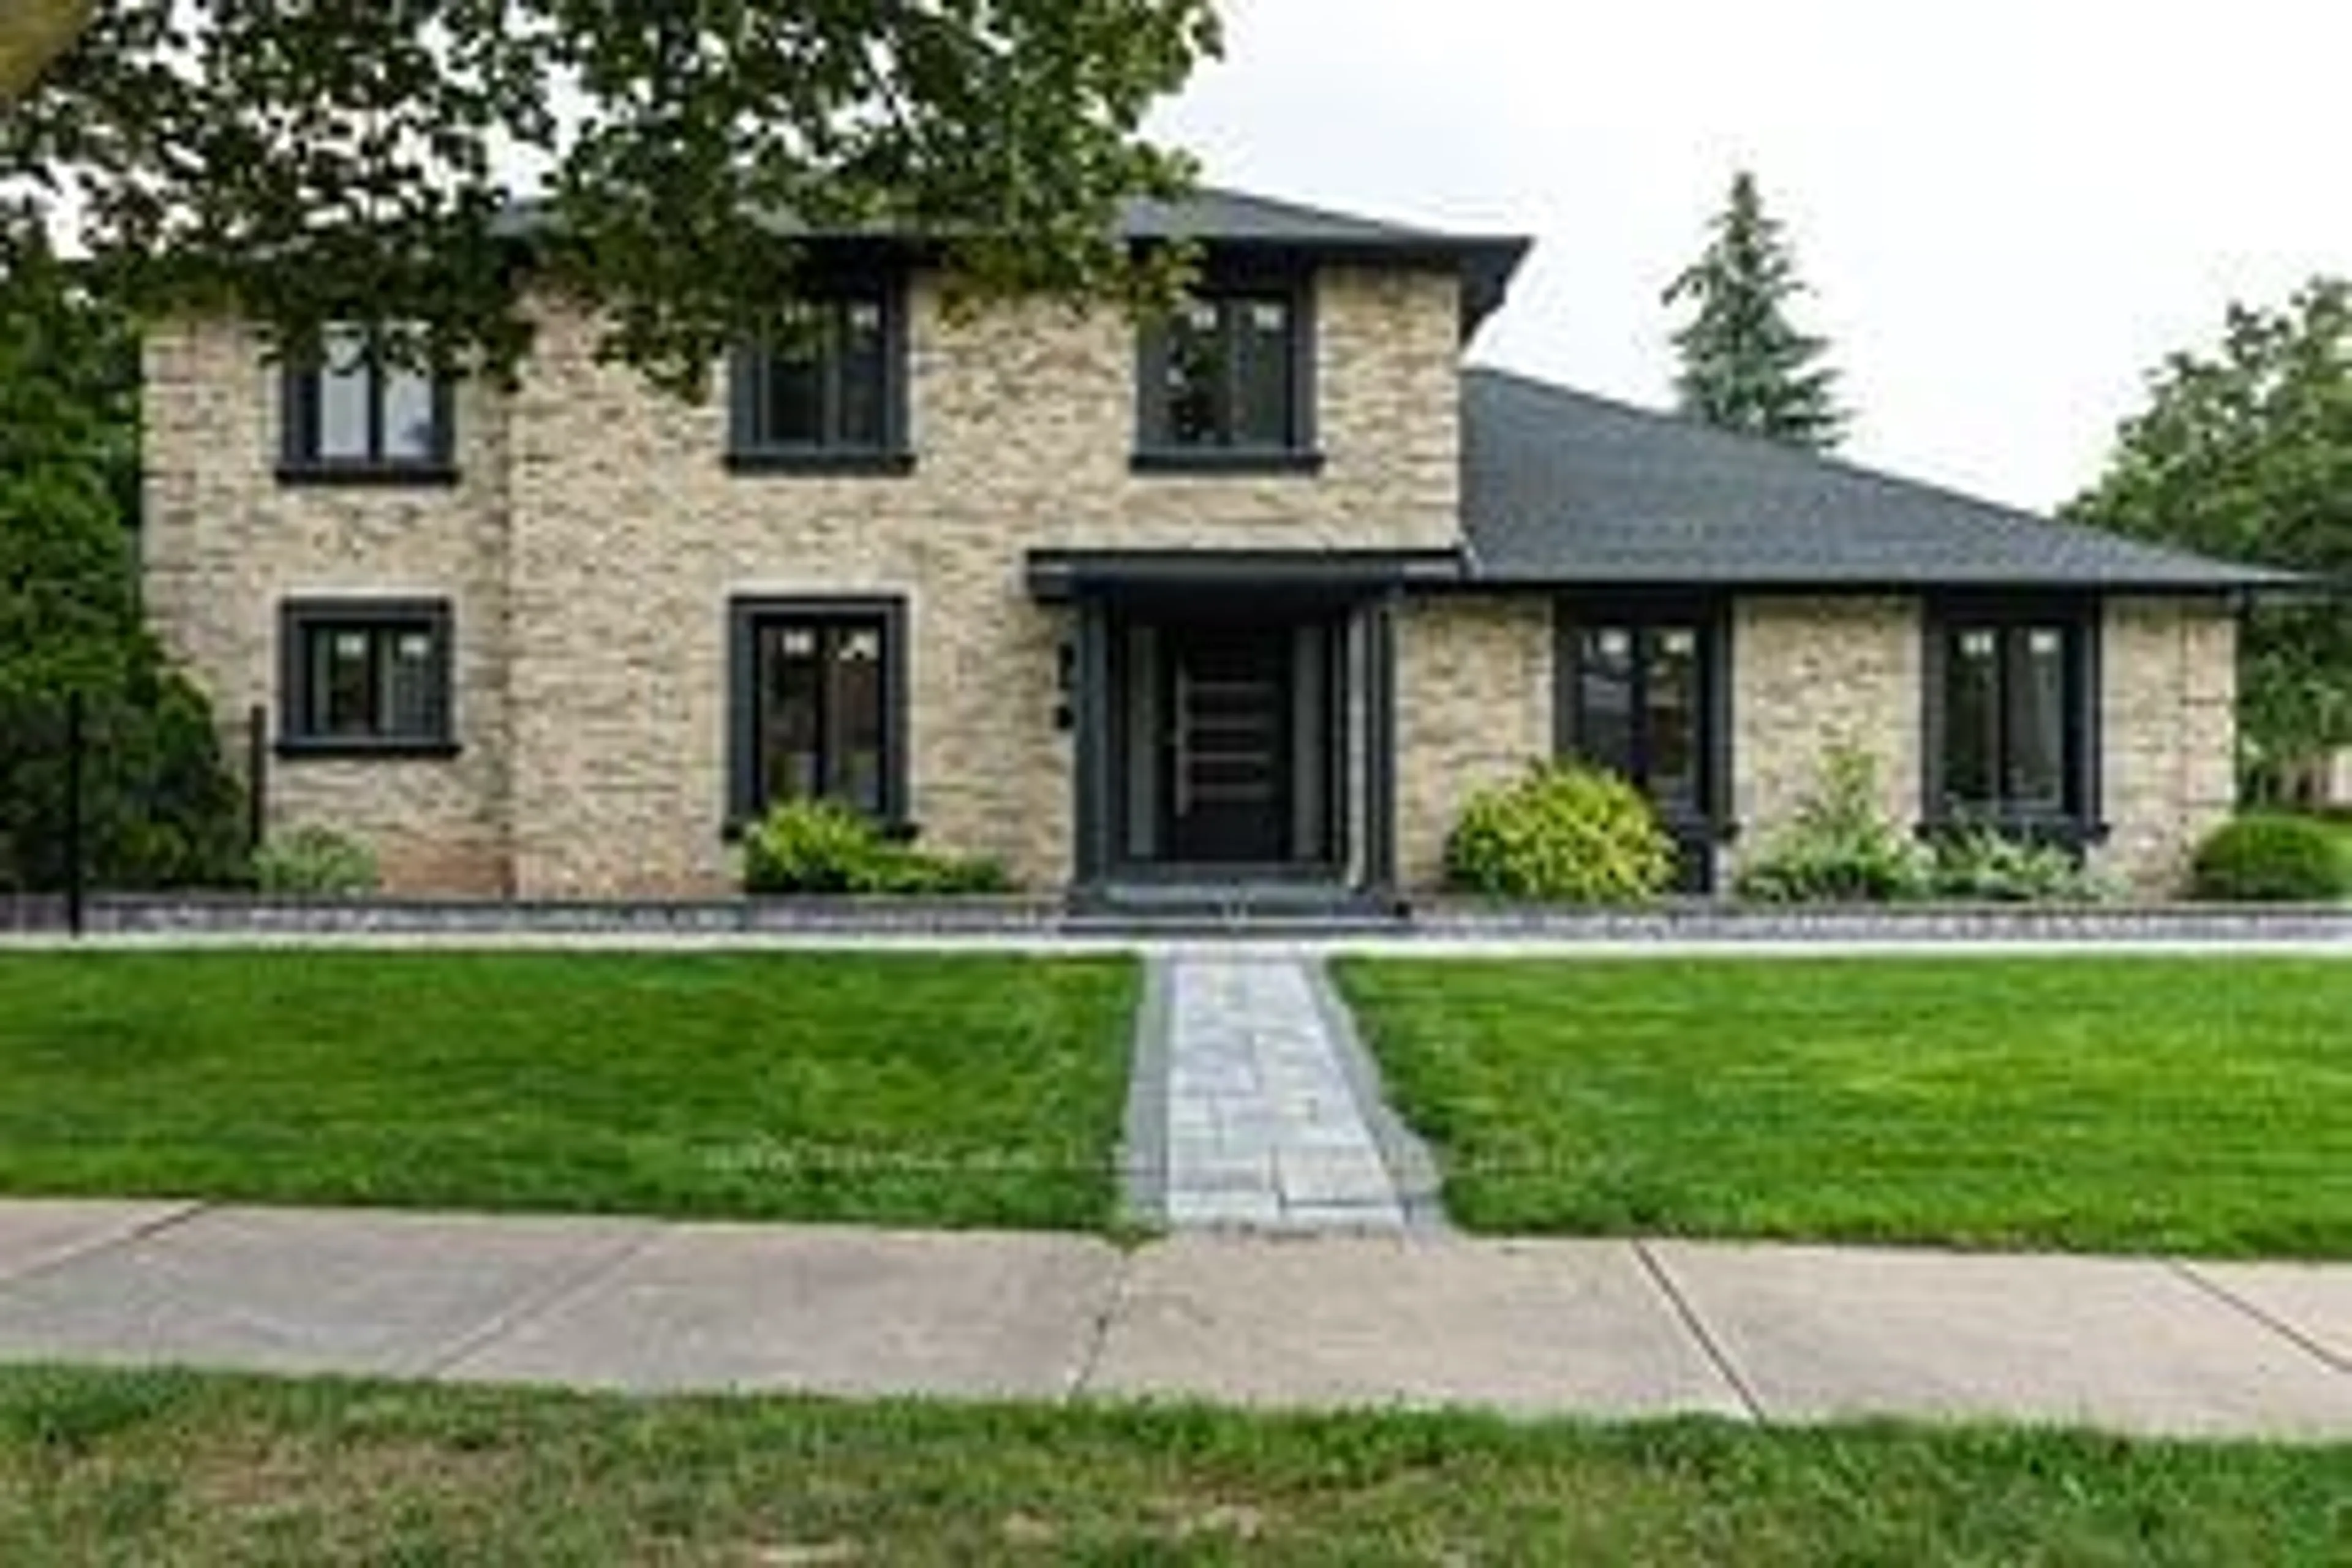 Home with brick exterior material for 2535 Robin Dr, Mississauga Ontario L5K 2G2